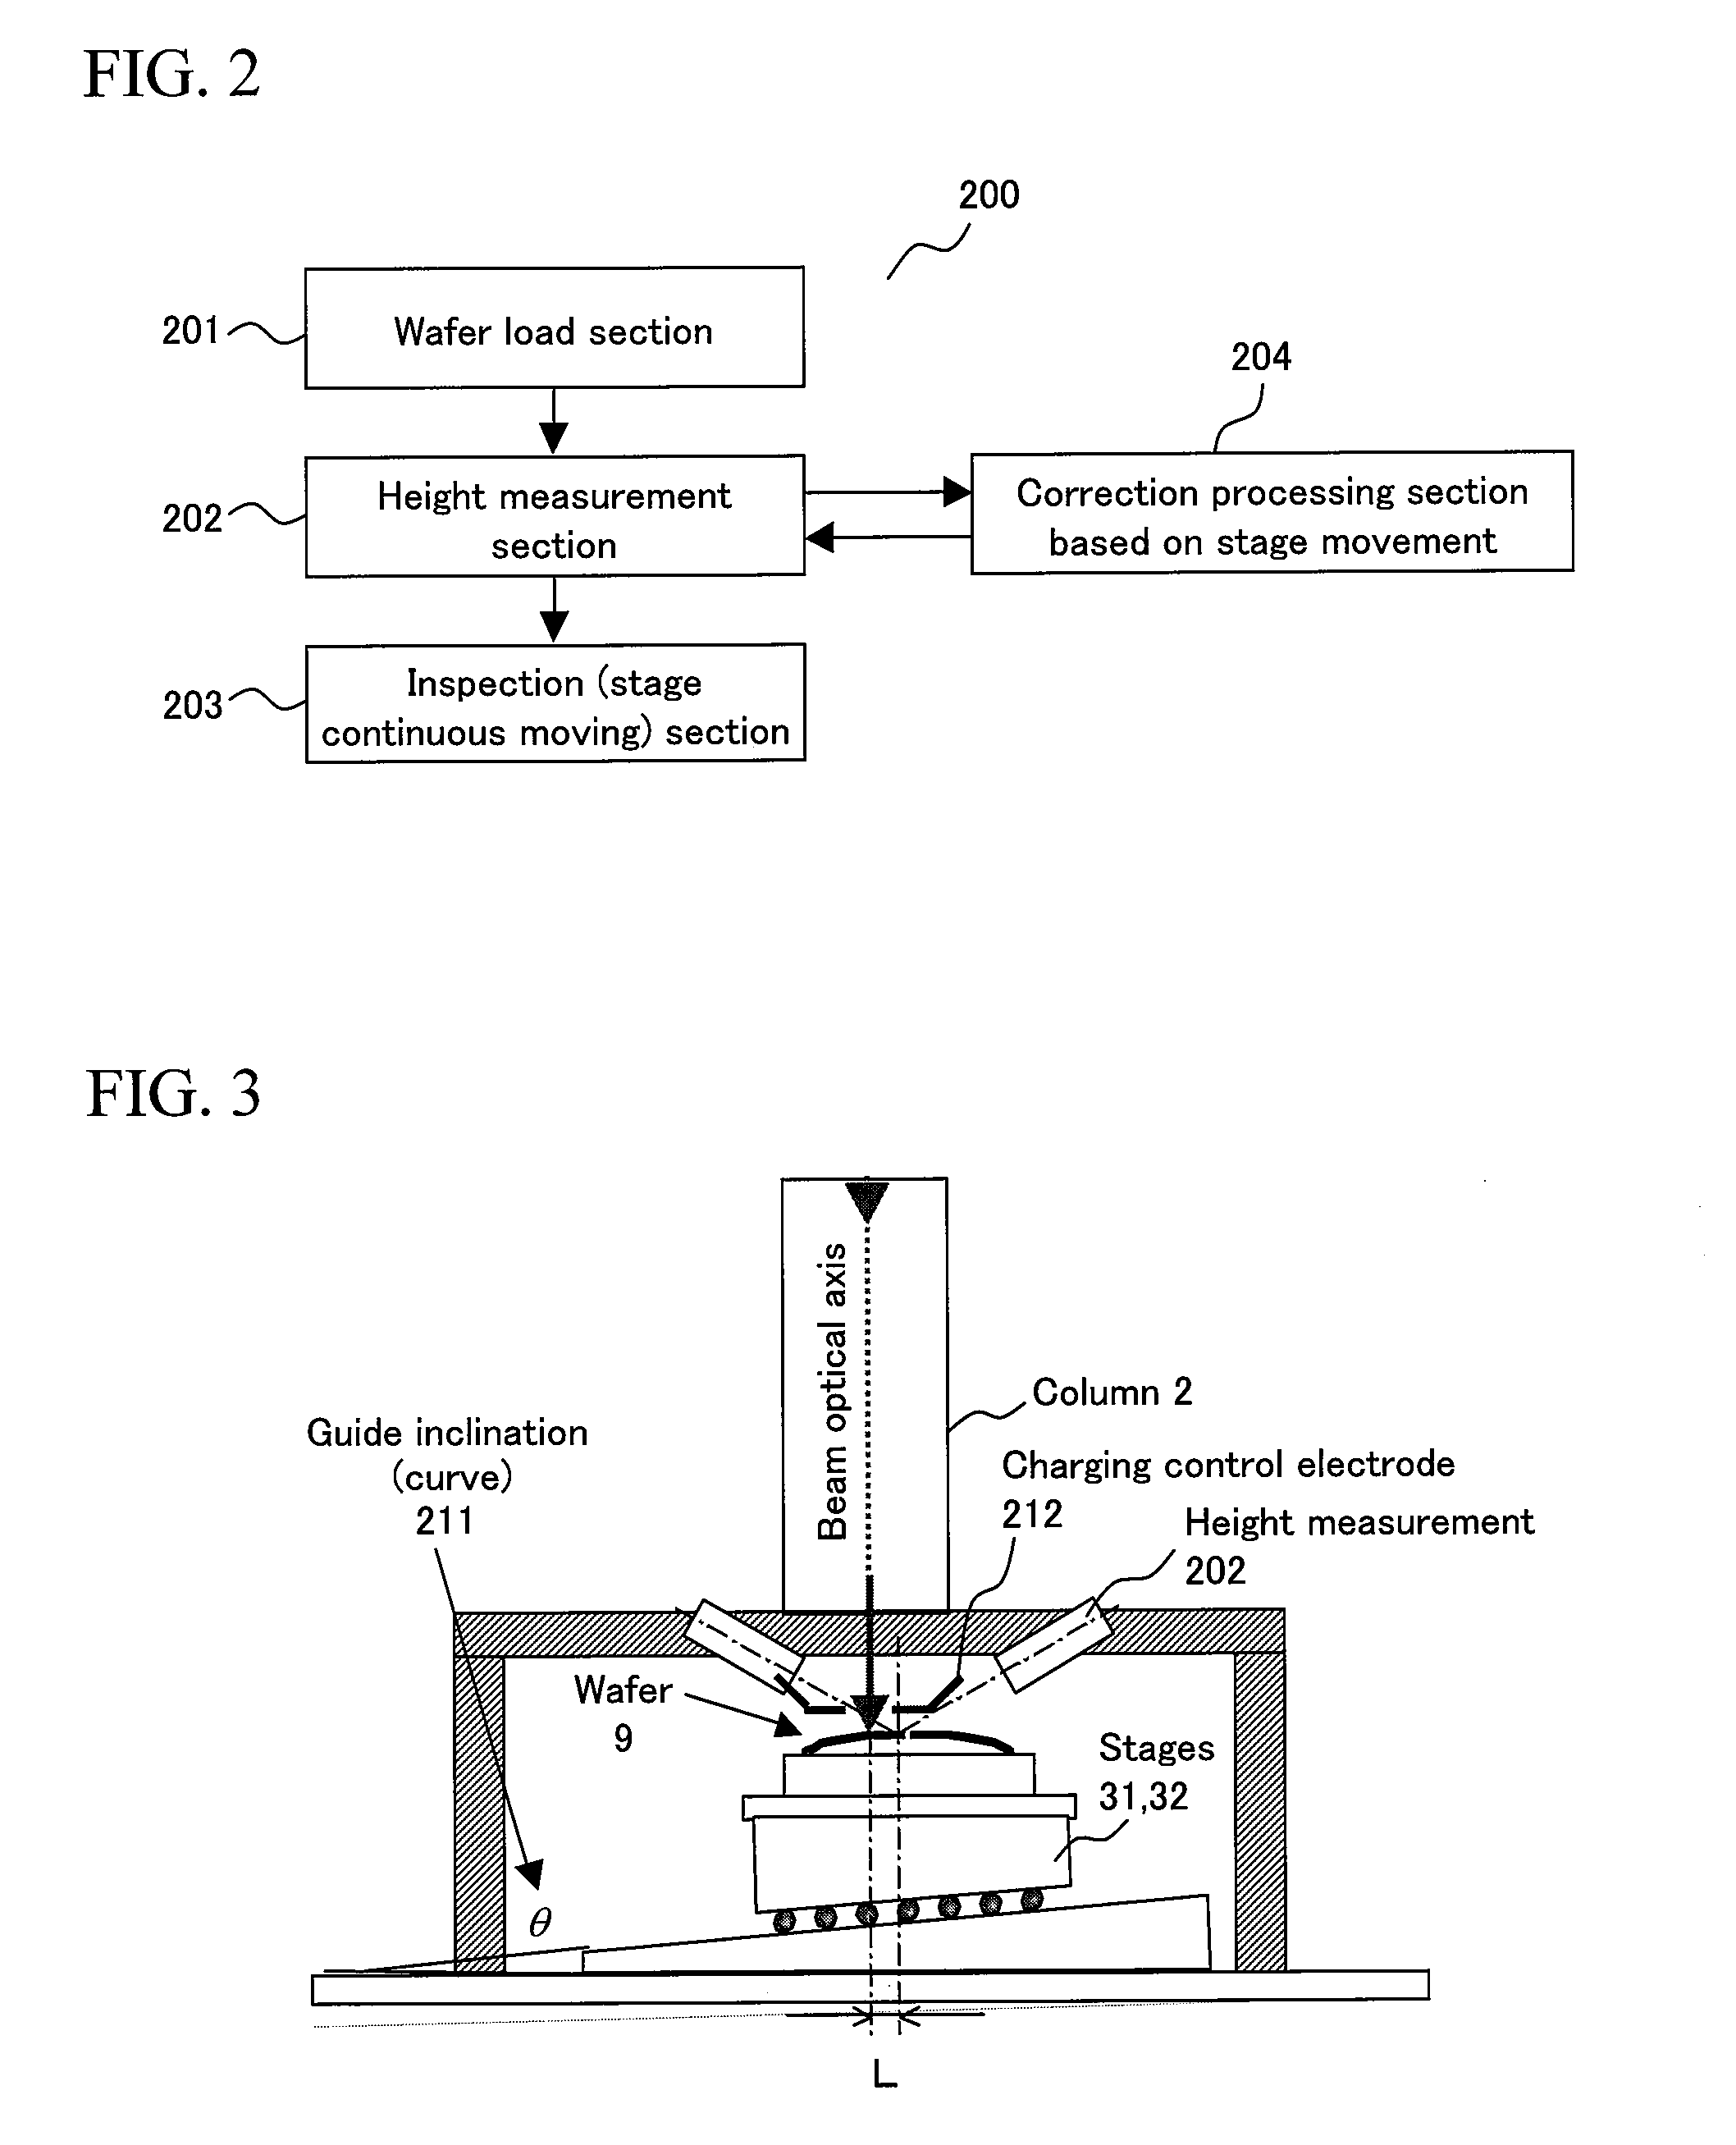 Apparatus for inspecting a substrate, a method of inspecting a substrate, a scanning electron microscope, and a method of producing an image using a scanning electron microscope